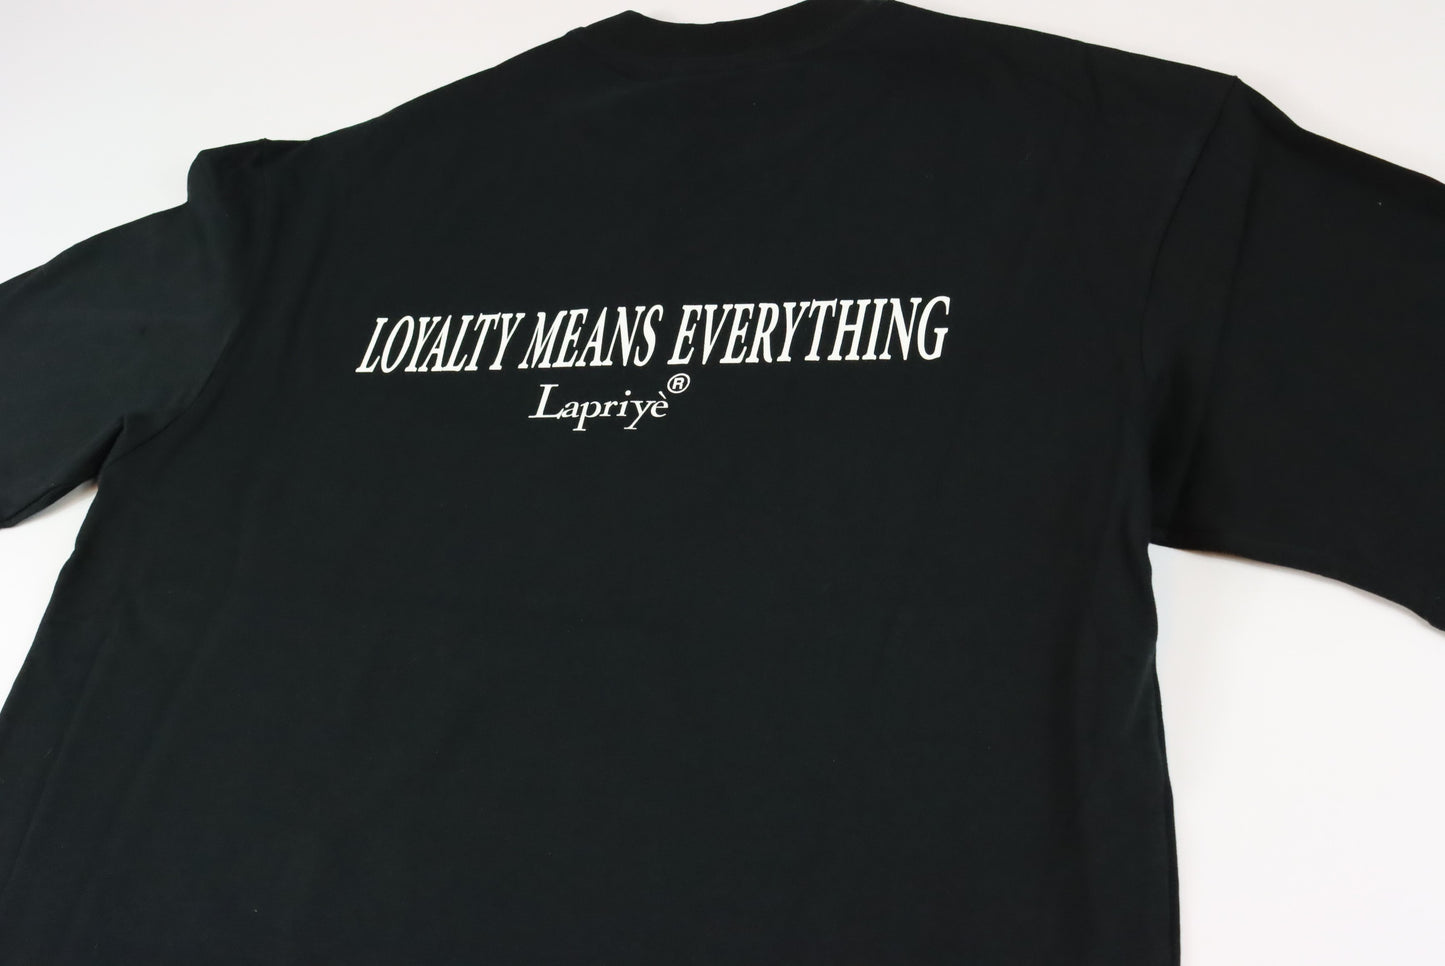 LOYALTY MEANS EVERYTHING TEE IN BLACK